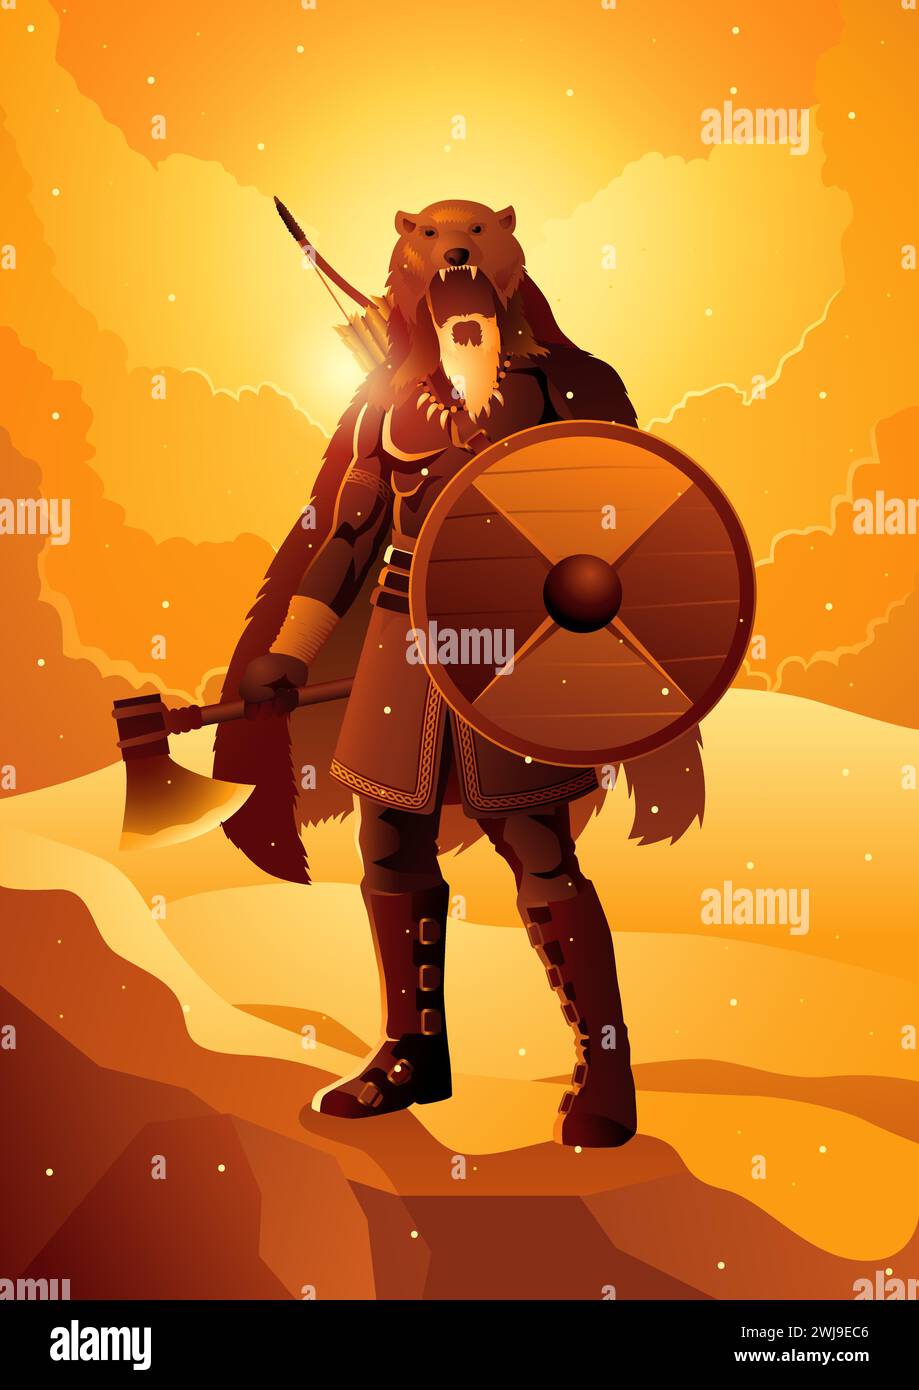 Viking berserker wearing bear skin holding an axe and a shield on snowy hills, vector illustration Stock Vector